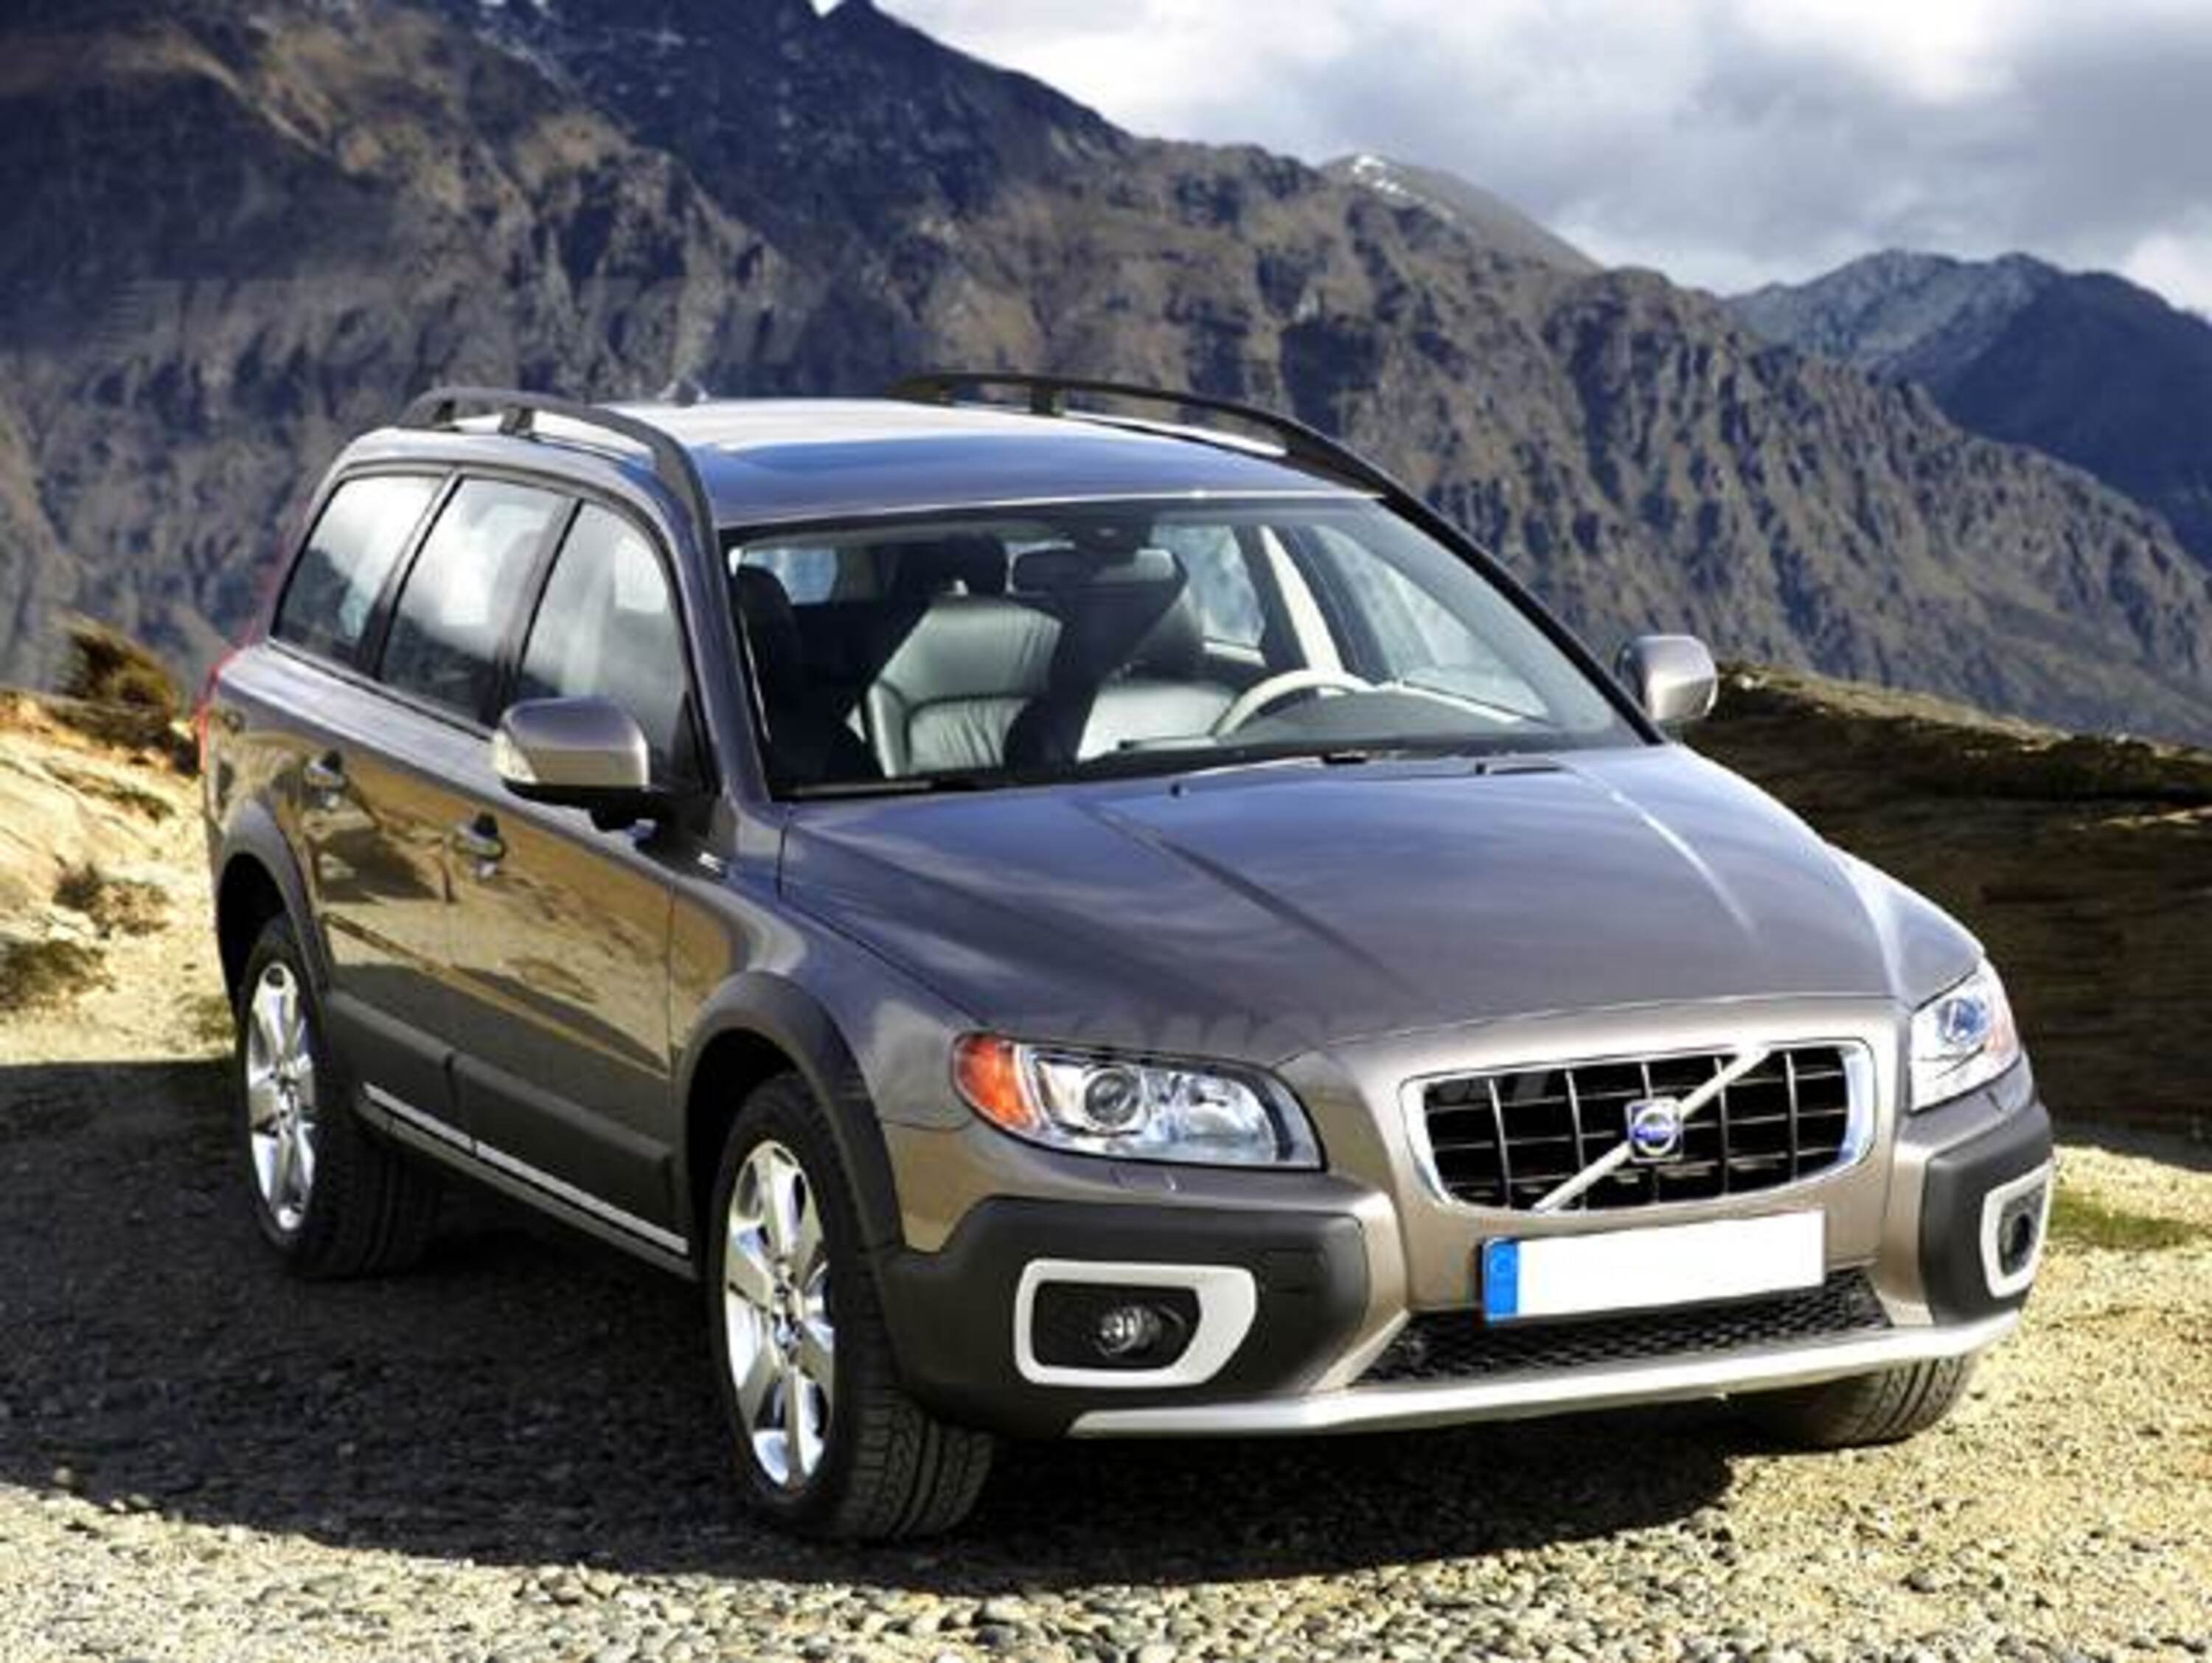 Volvo XC70 2.4 D 175 CV FWD Geartronic Kinetic